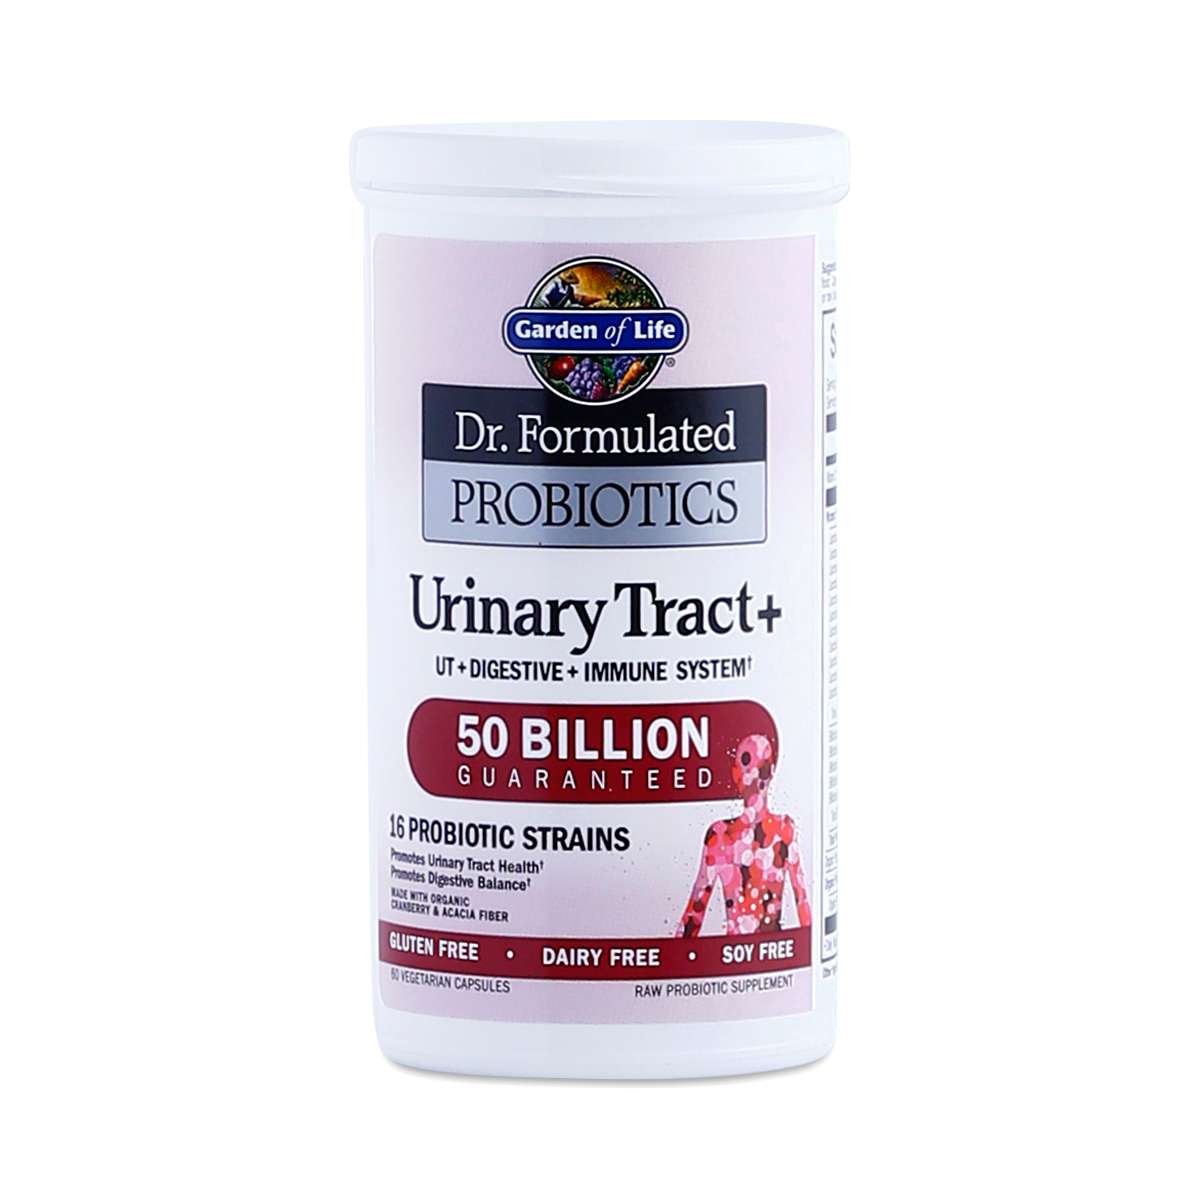 Probiotics for Urinary Tract by Garden of Life